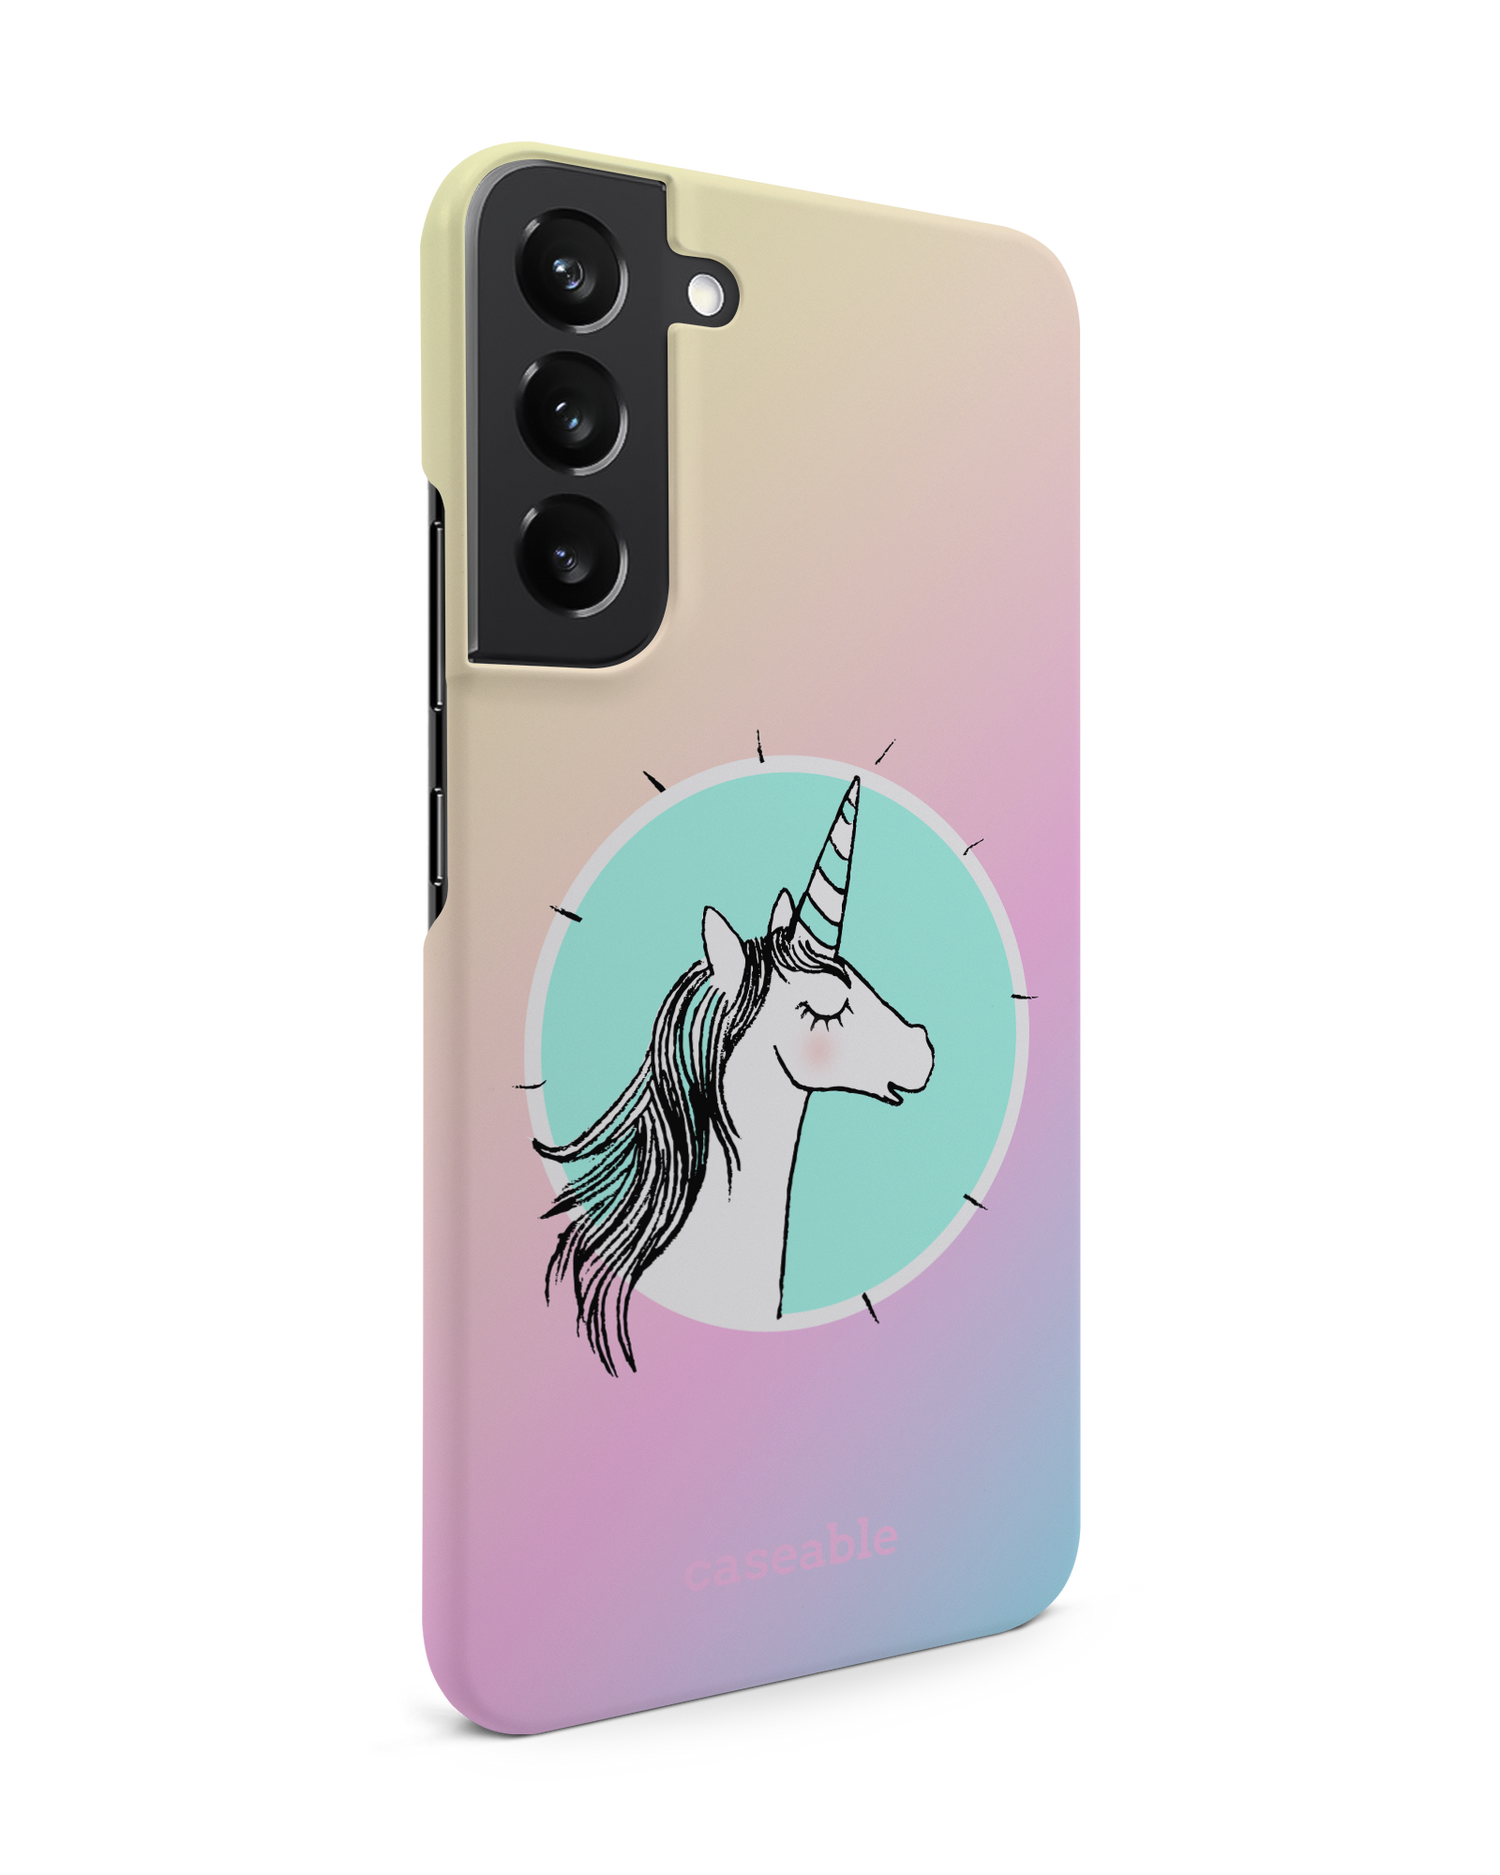 Happiness Unicorn Hard Shell Phone Case Samsung Galaxy S22 Plus 5G: View from the left side